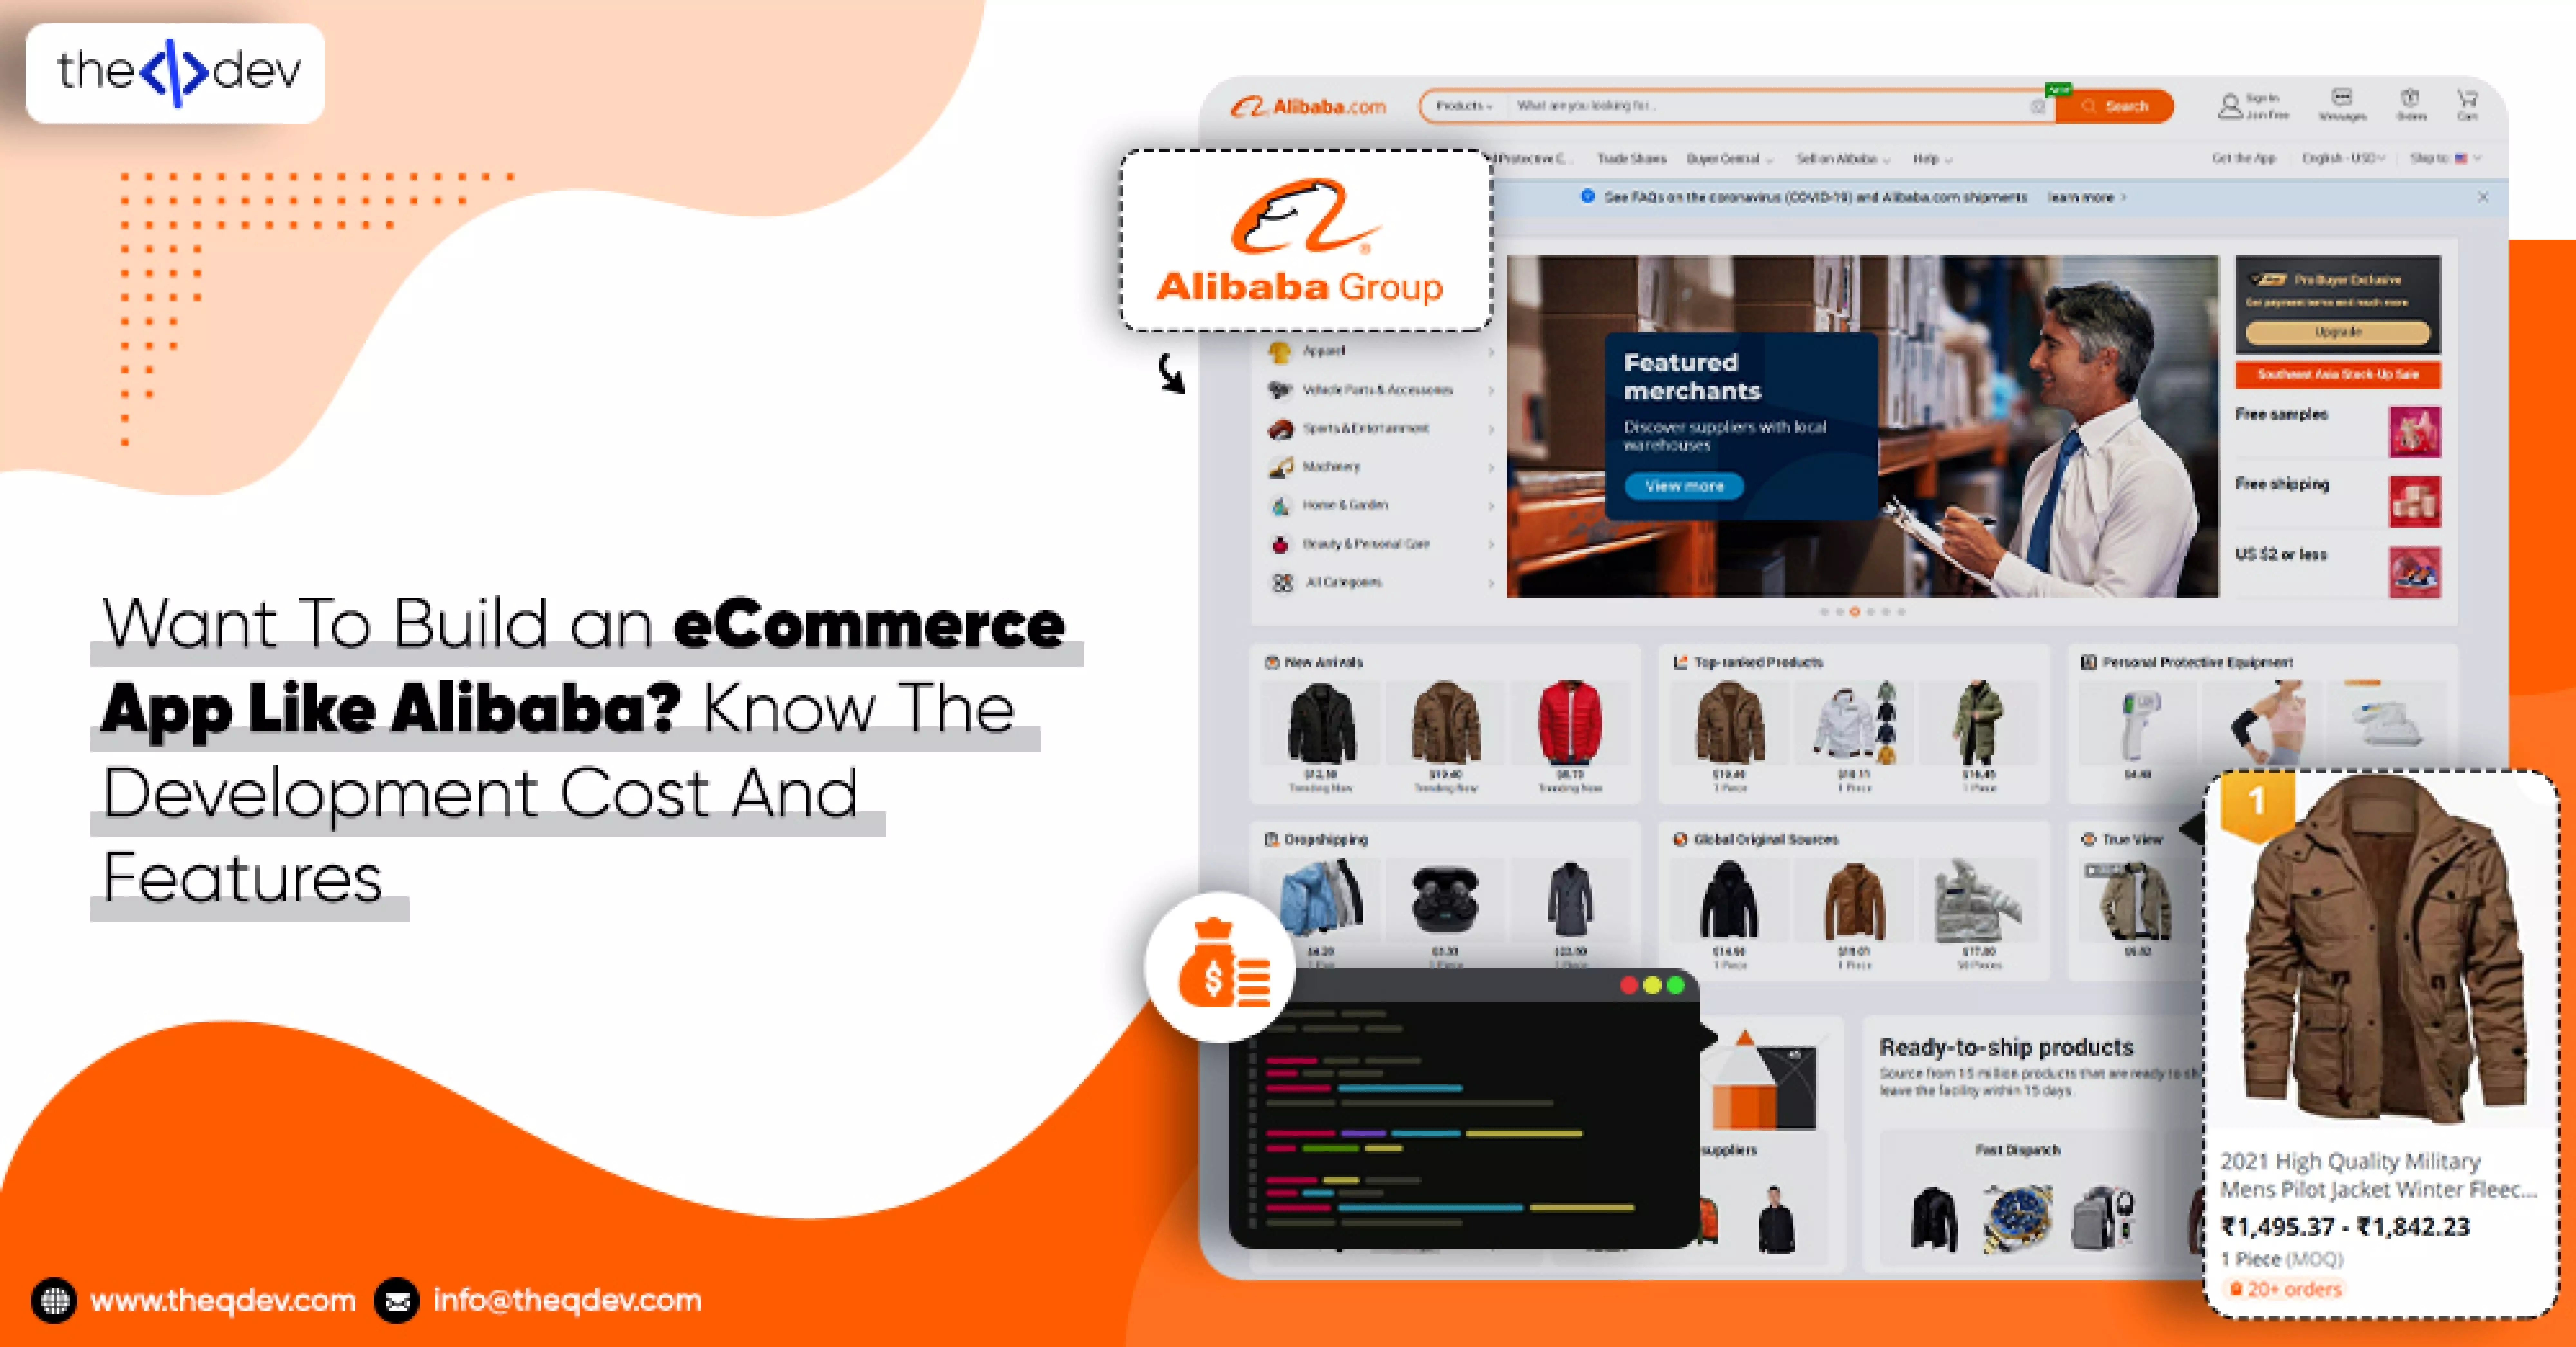 Want To Build an eCommerce App Like Alibaba Know The Development Cost And Features